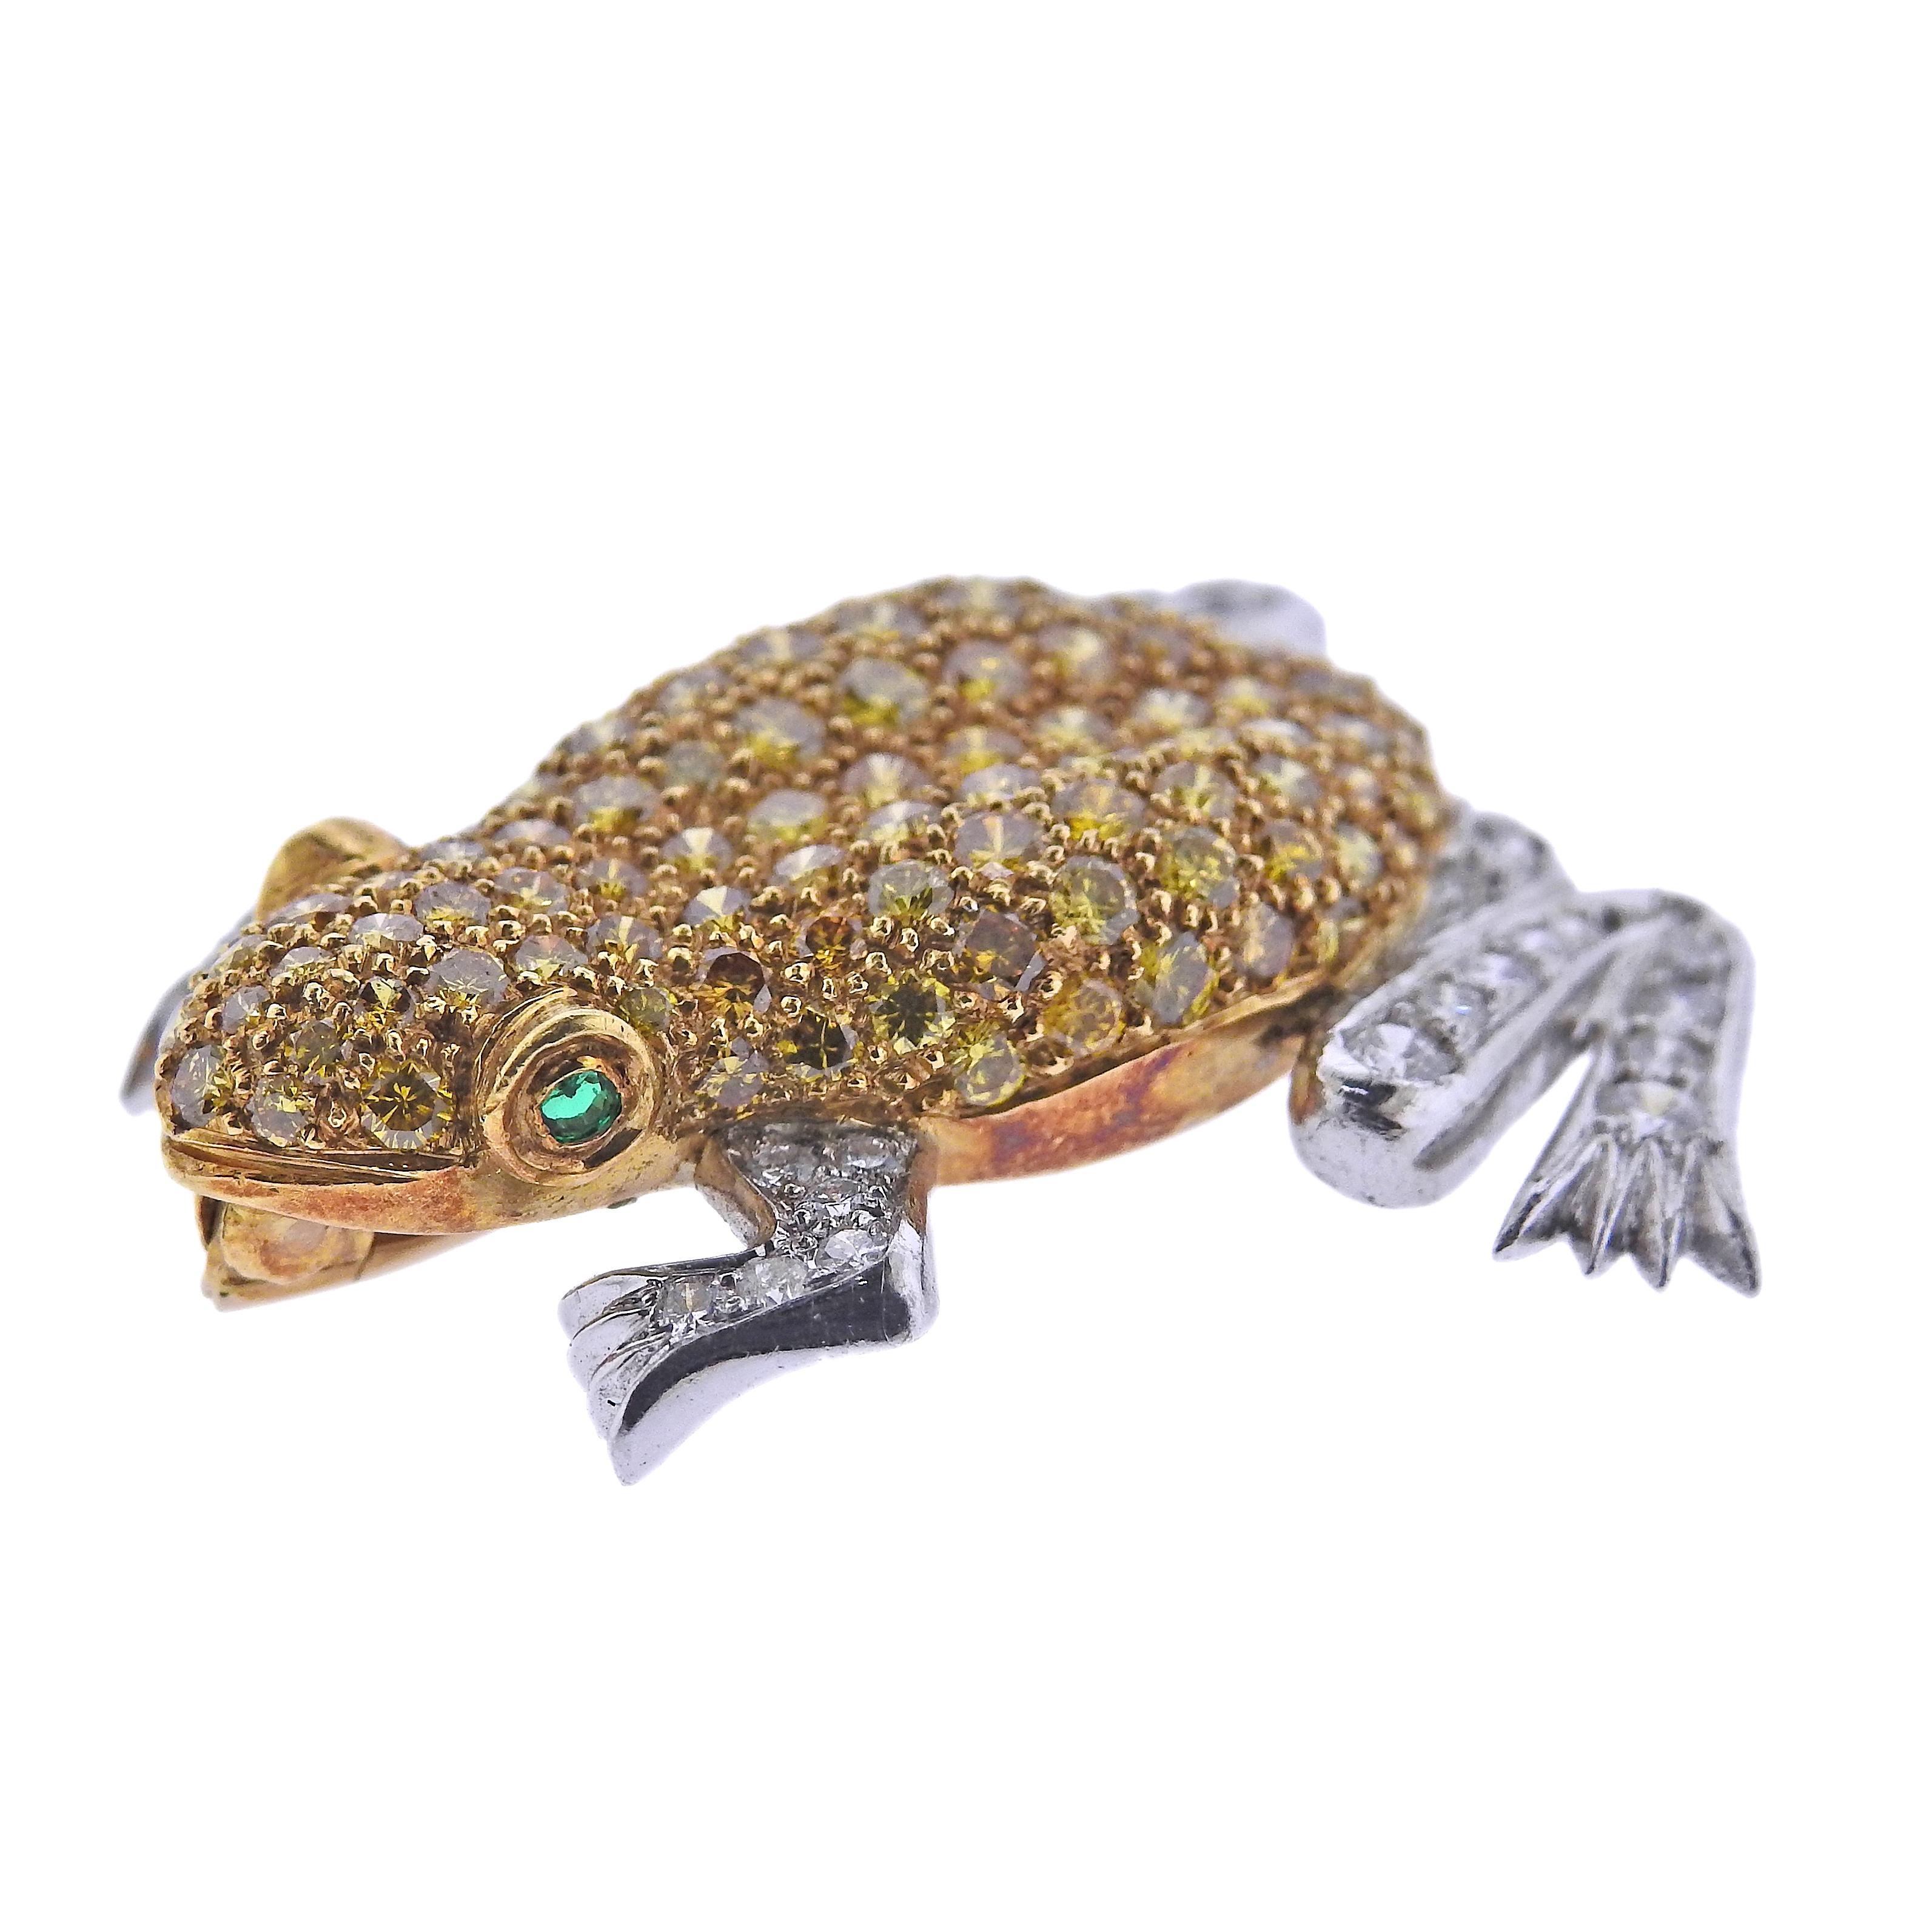 English made 18k yellow and white gold frog brooch, set with yellow sapphires, emerald eyes and approx. 0.64ctw in SI/H diamonds. Brooch is 33mm x 30mm. Marked 750, English marks. Weight - 9.5 grams.